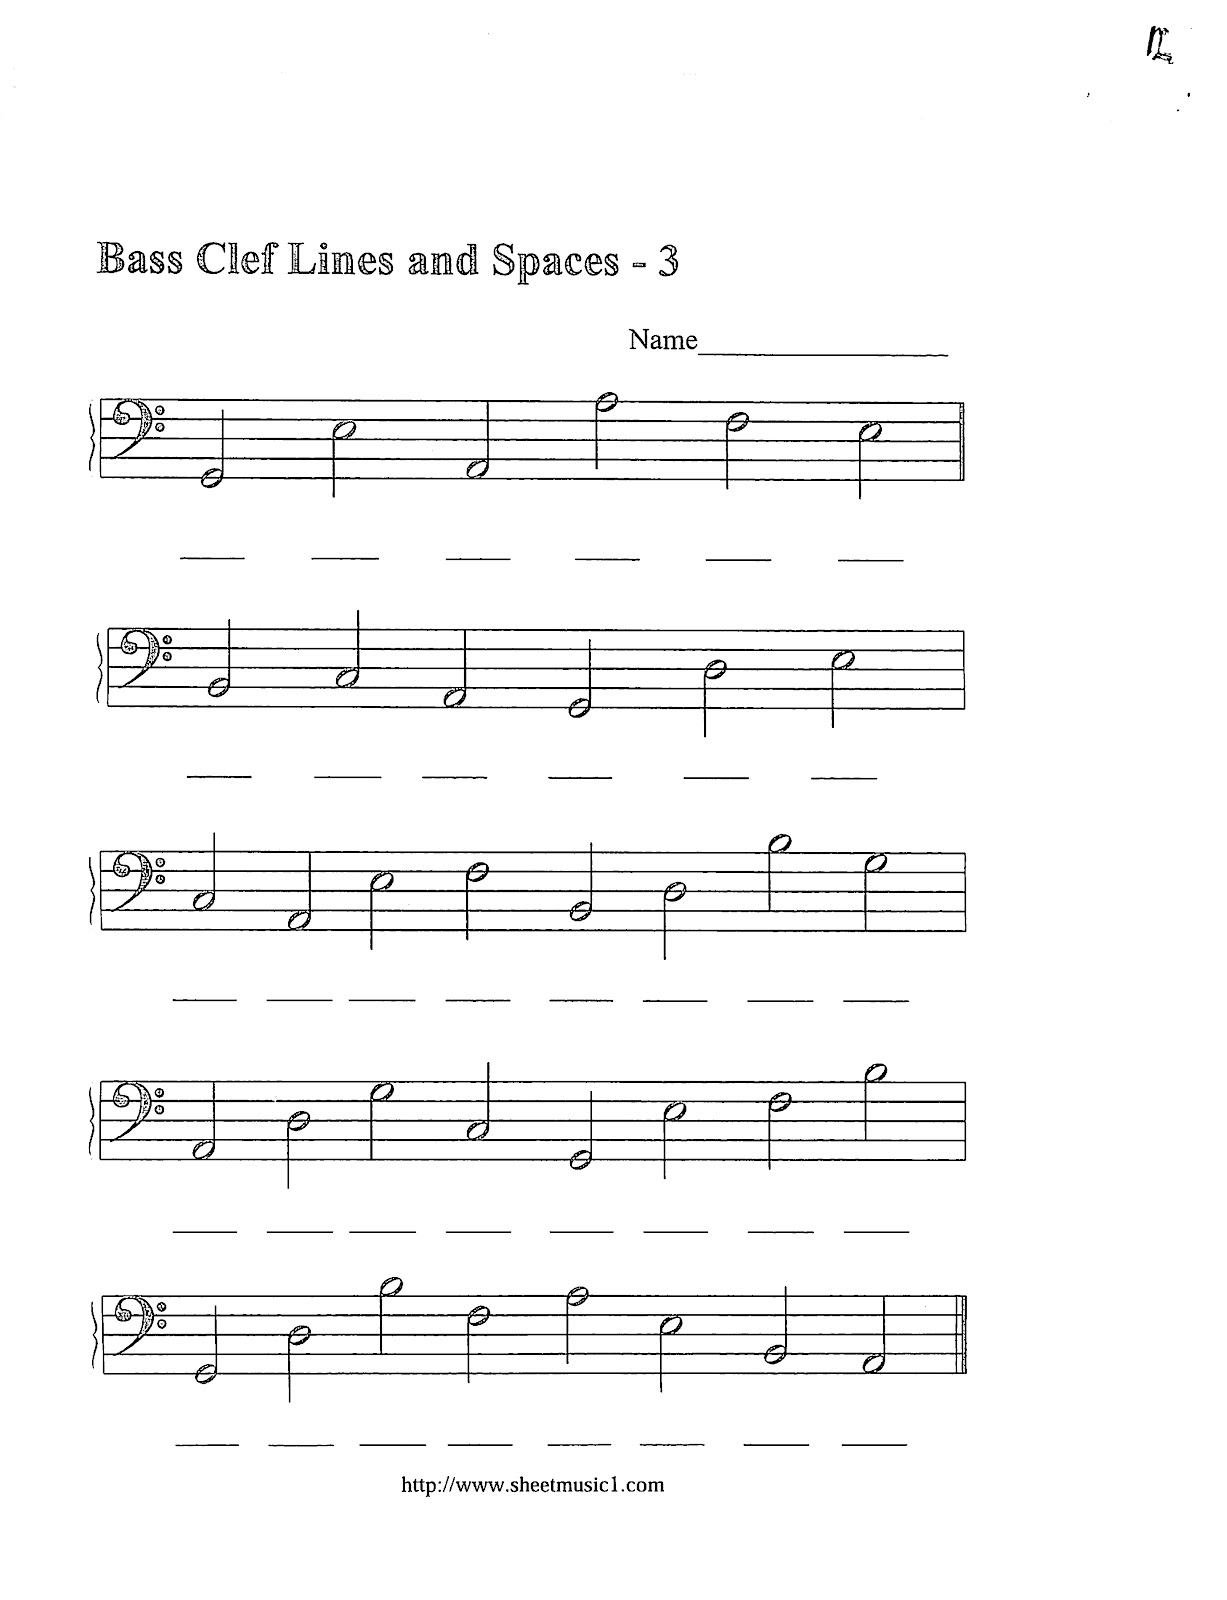 Bass Clef Worksheets Image